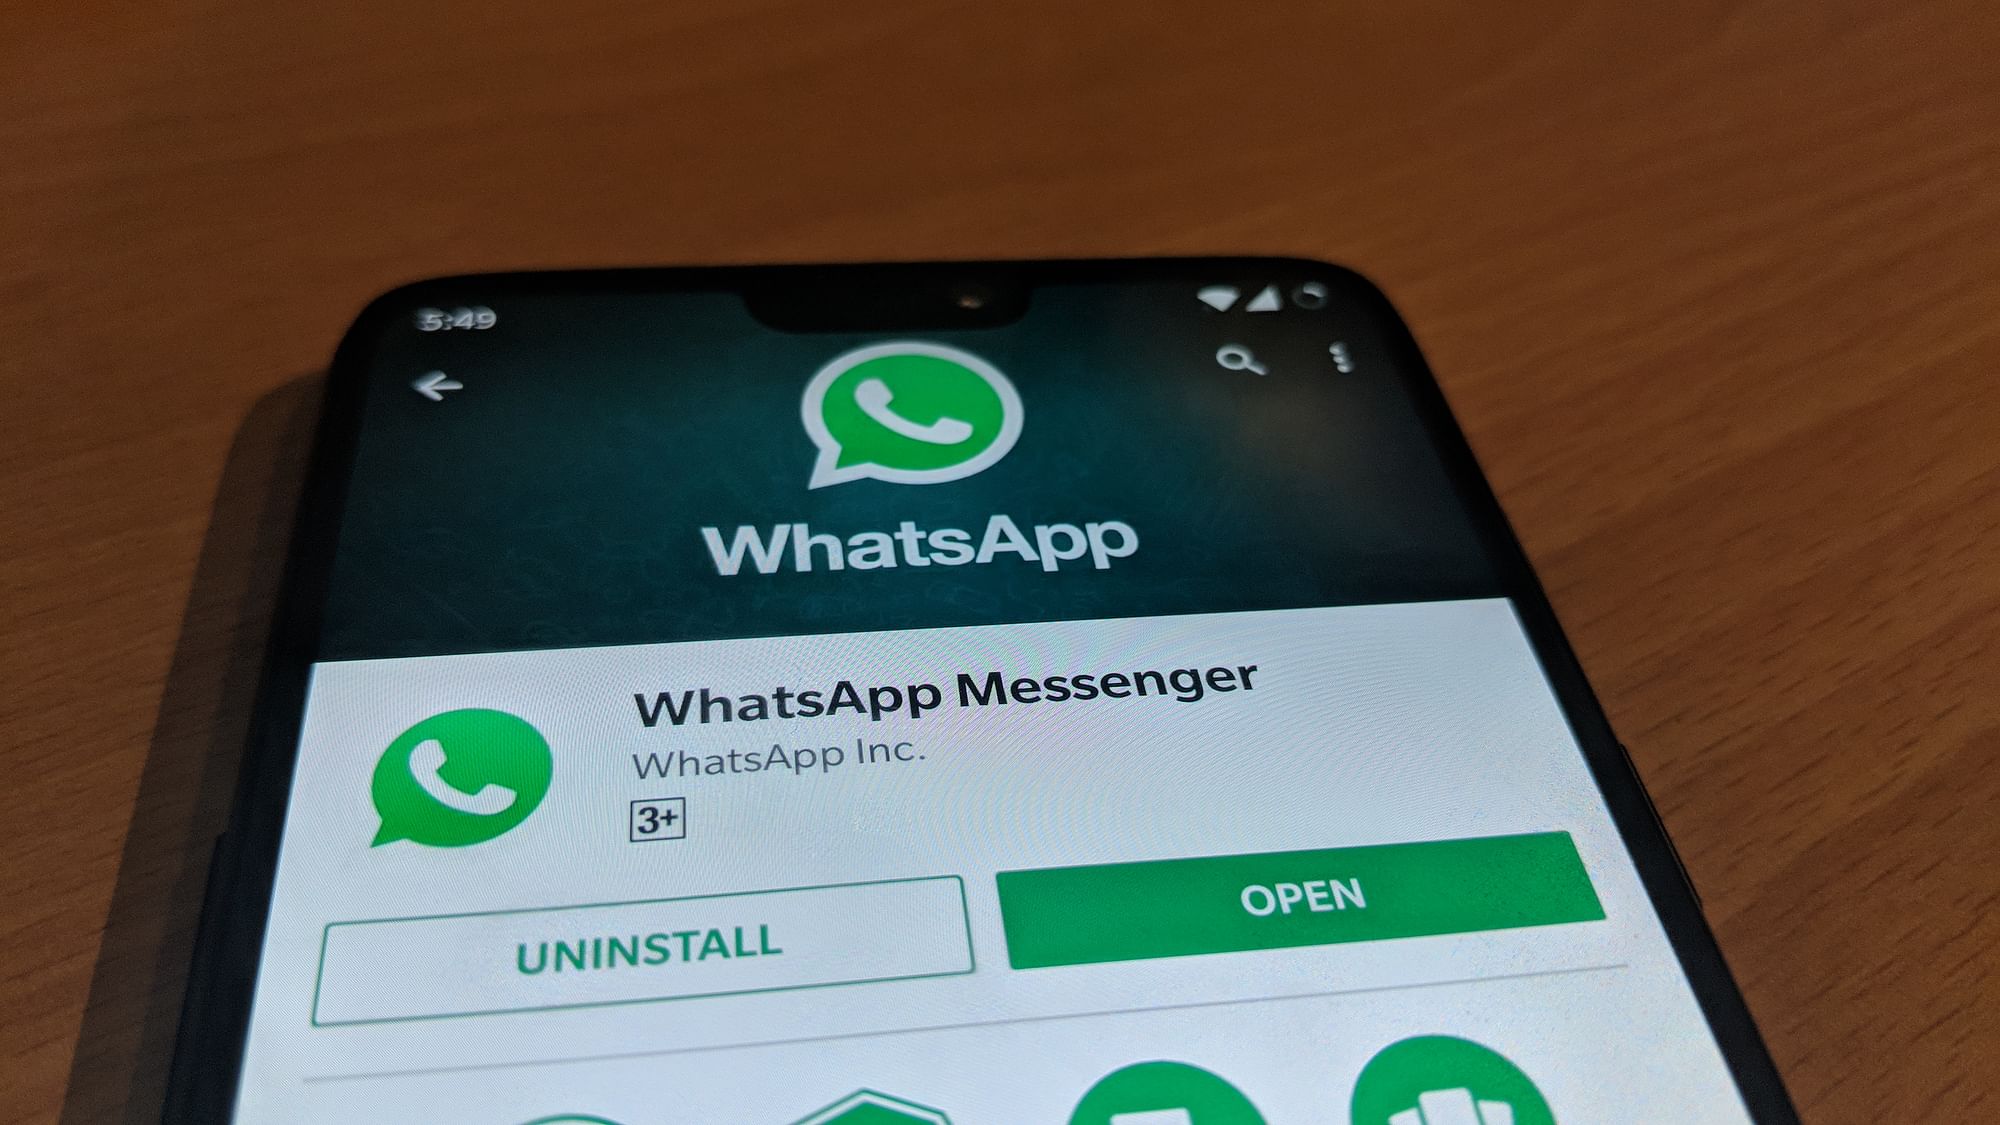 WhatsApp will not work on the platform after Microsoft decided to stop supporting it from later this year.